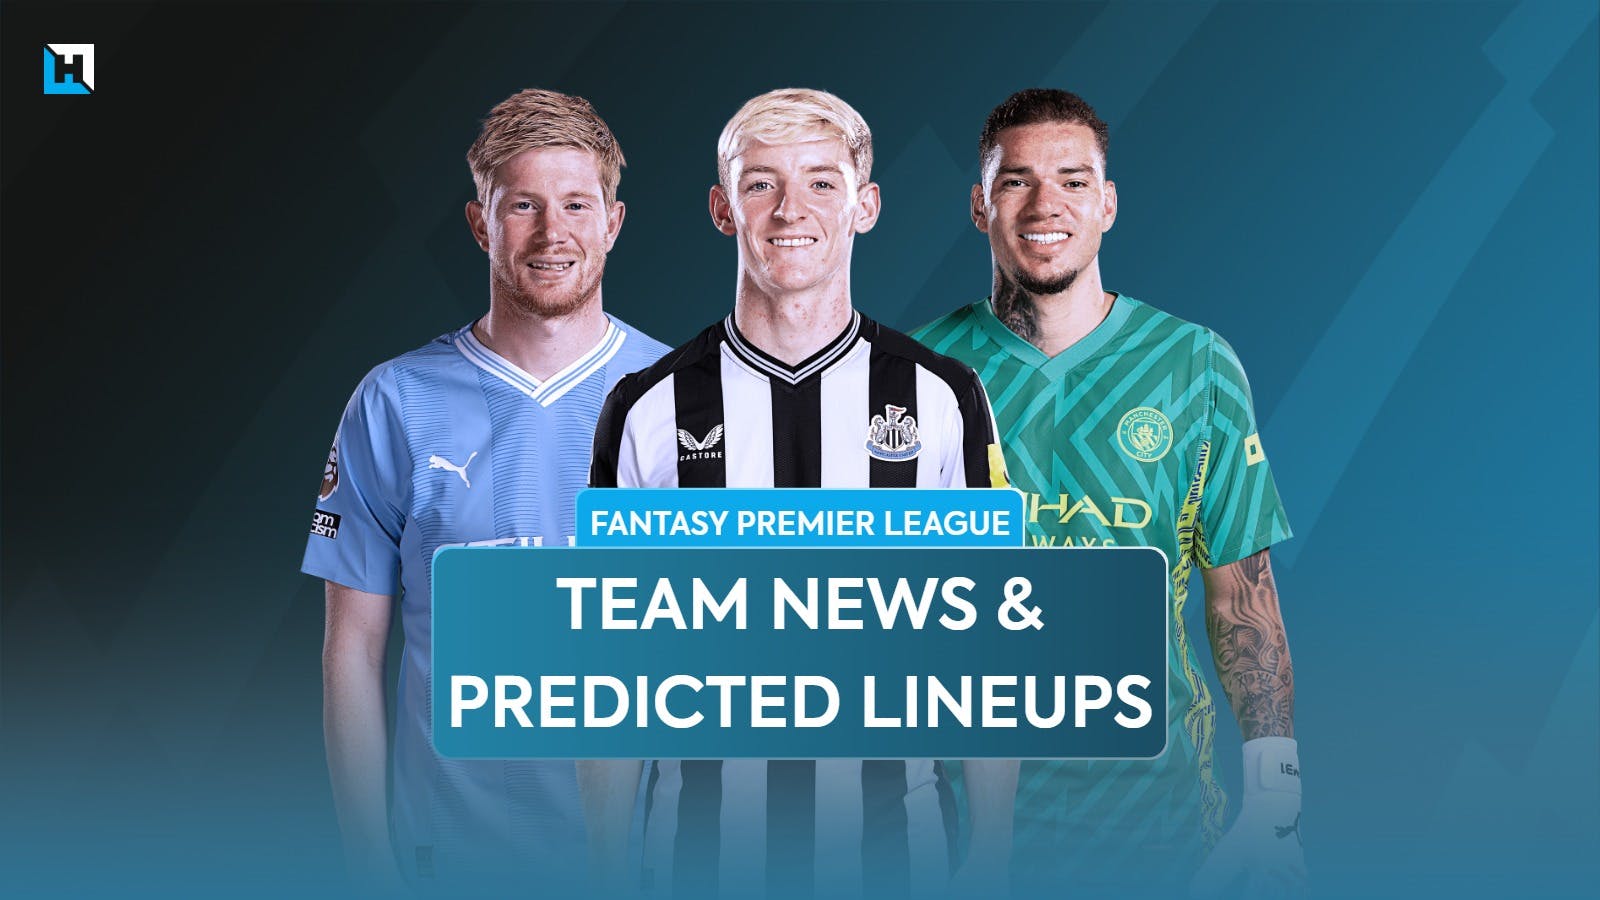 Premier League team news and predicted lineups for Gameweek 38